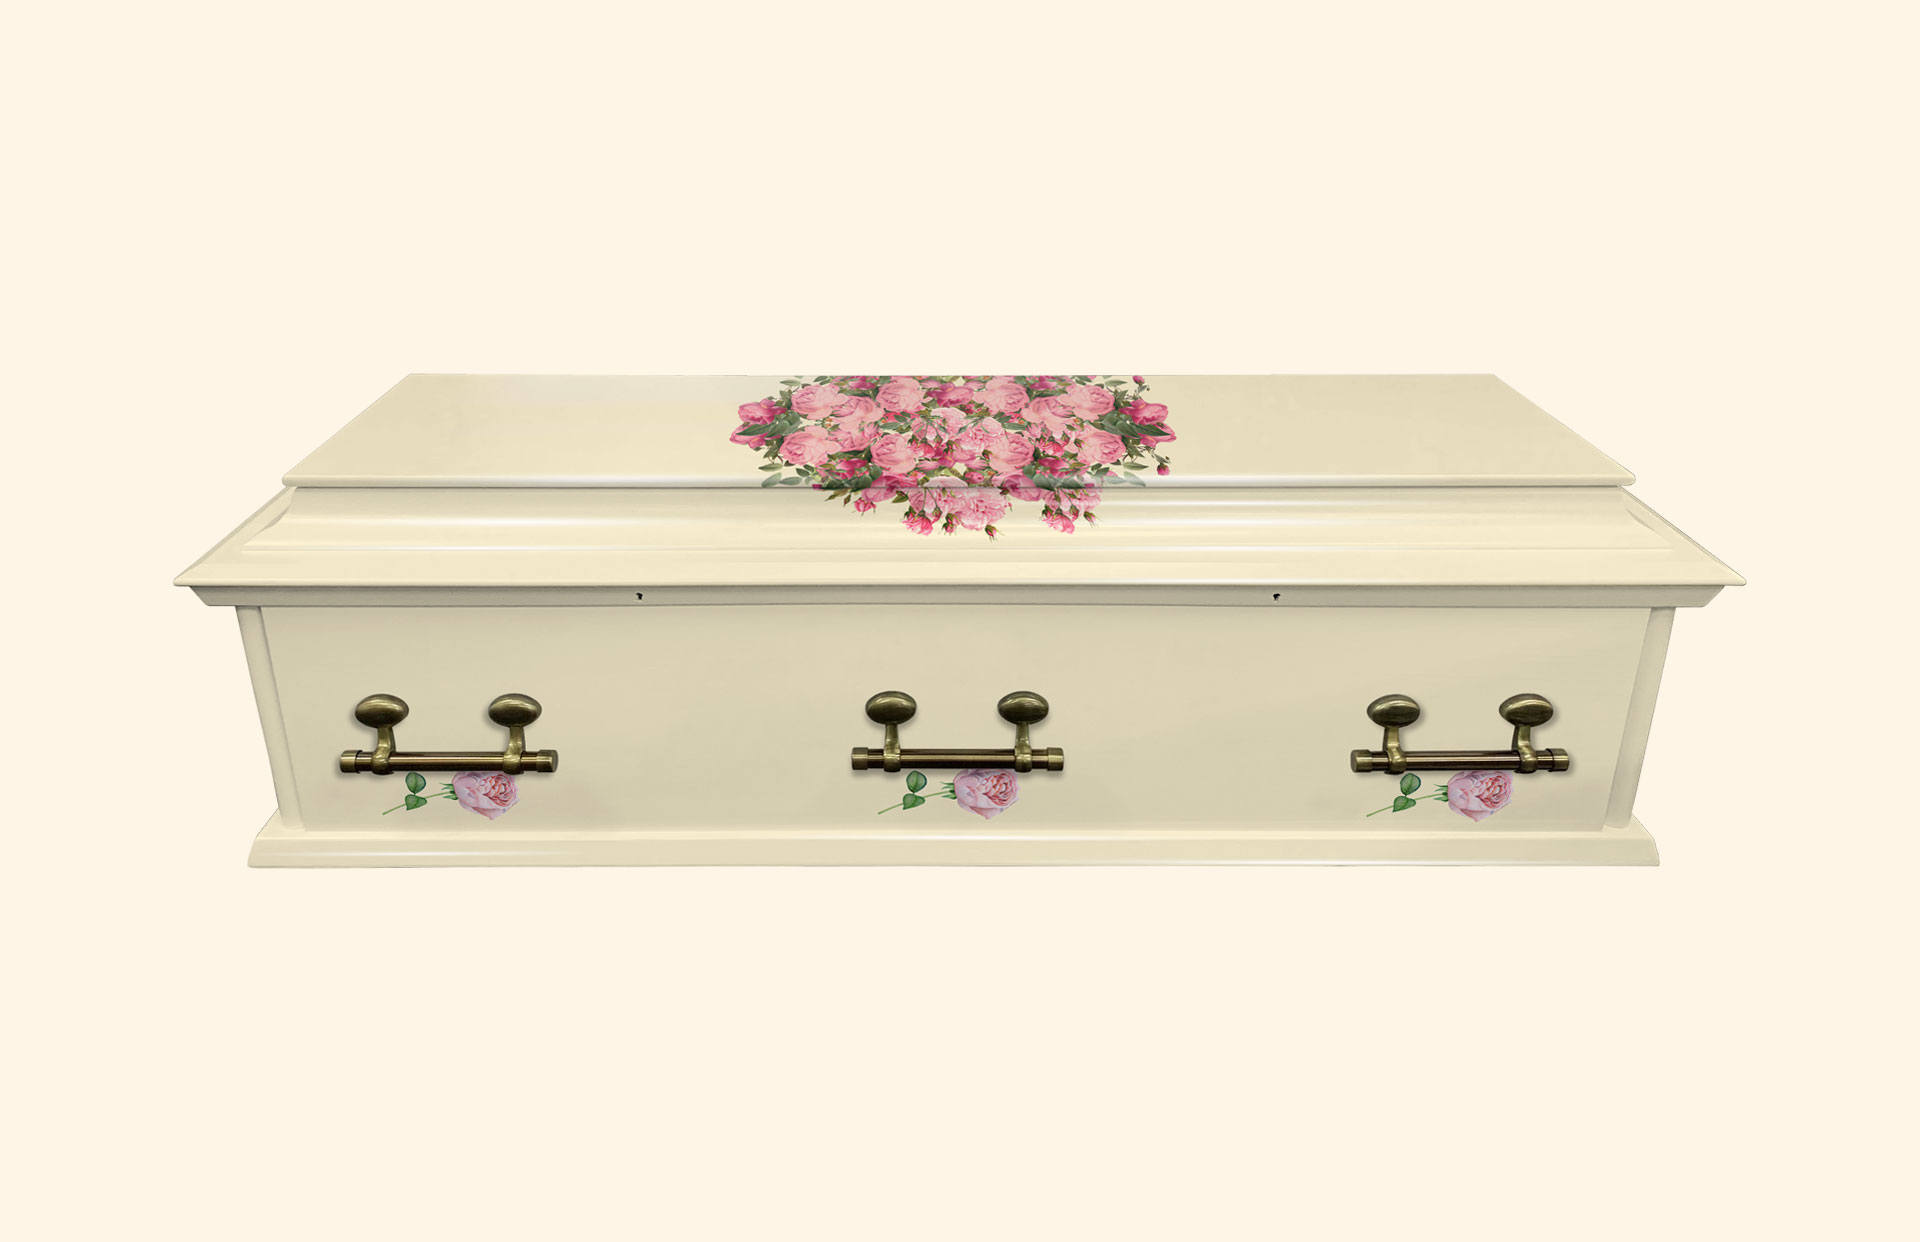 Oxford Roses Cream American Style Casket